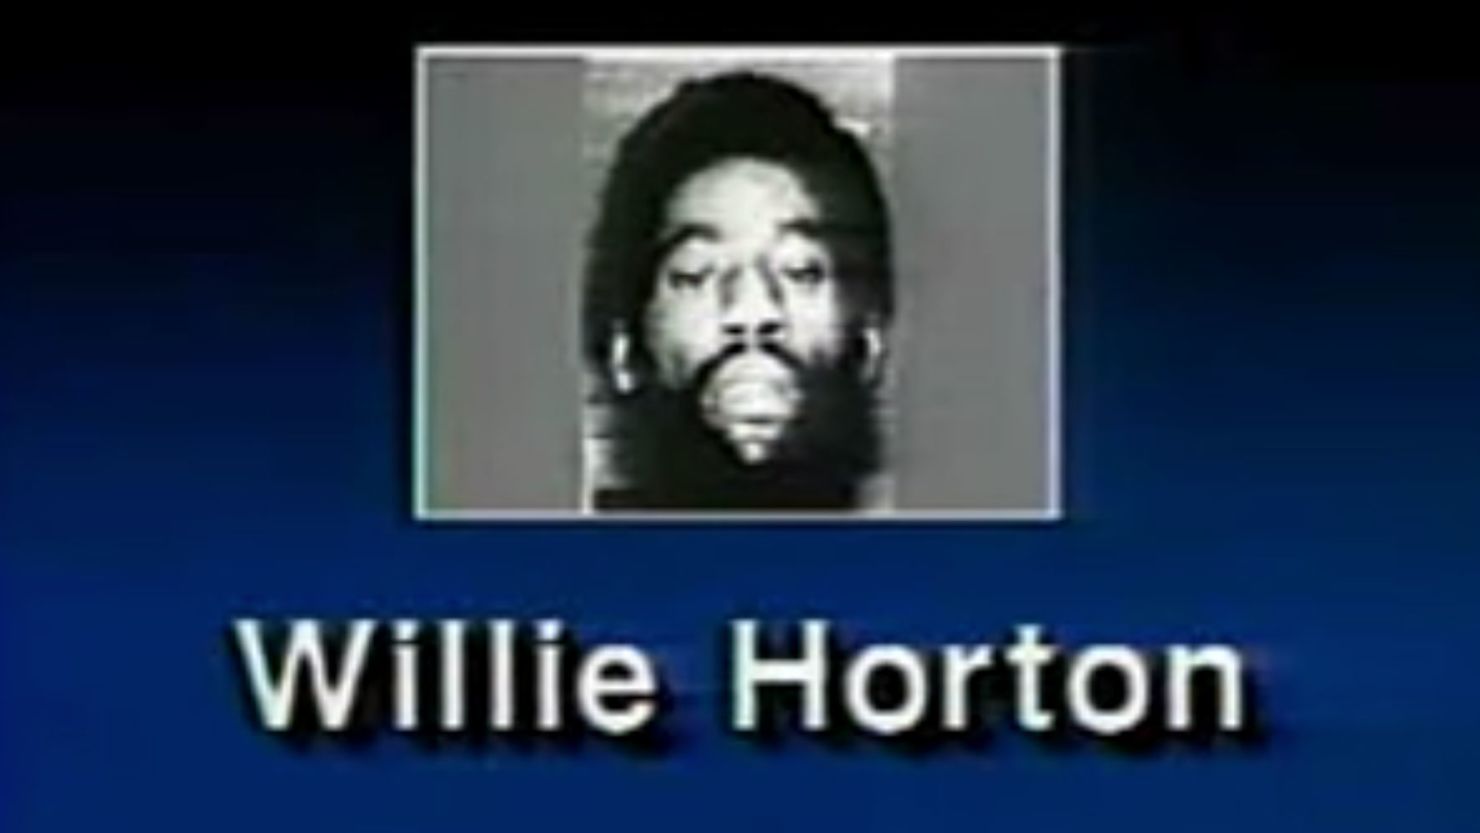 An image of convicted killer Willie Horton from a controversial 1988 campaign ad.